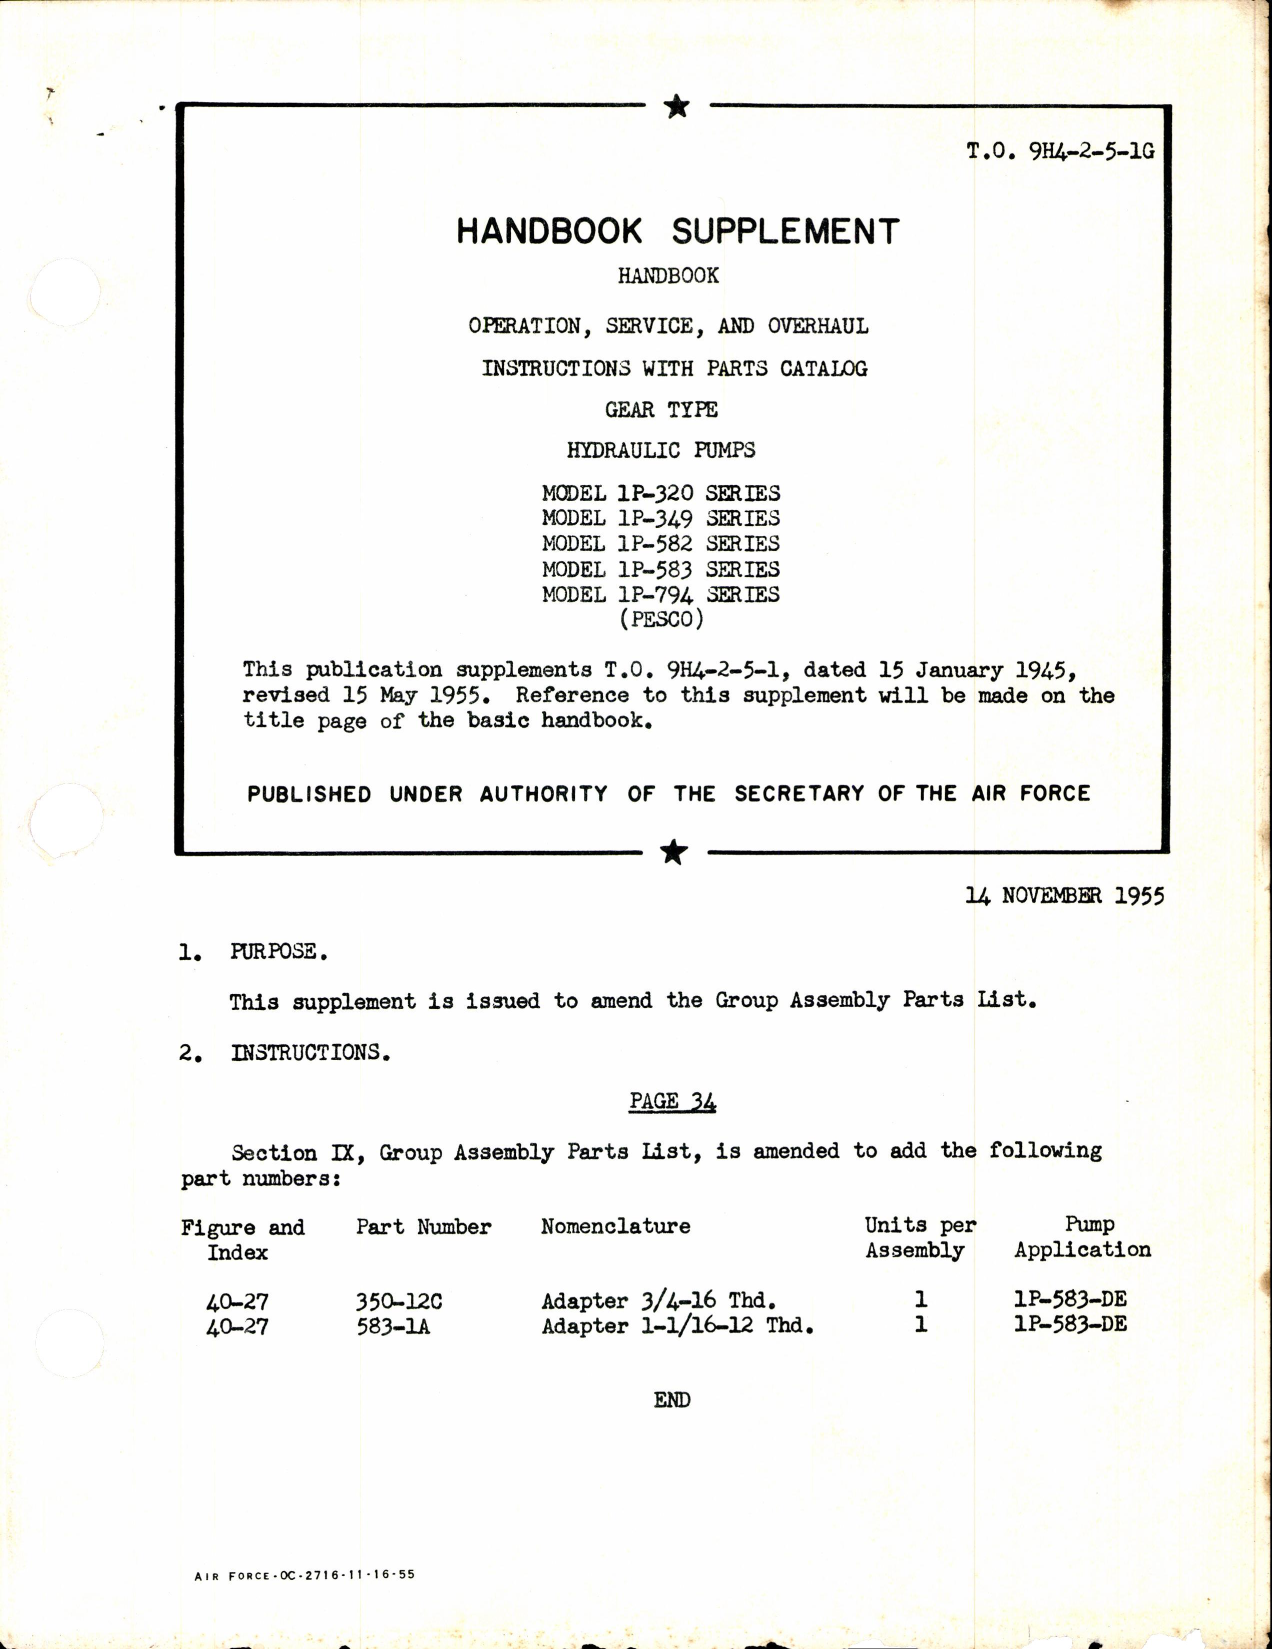 Sample page 1 from AirCorps Library document: Gear Type Hydraulic Pumps (Pesco)